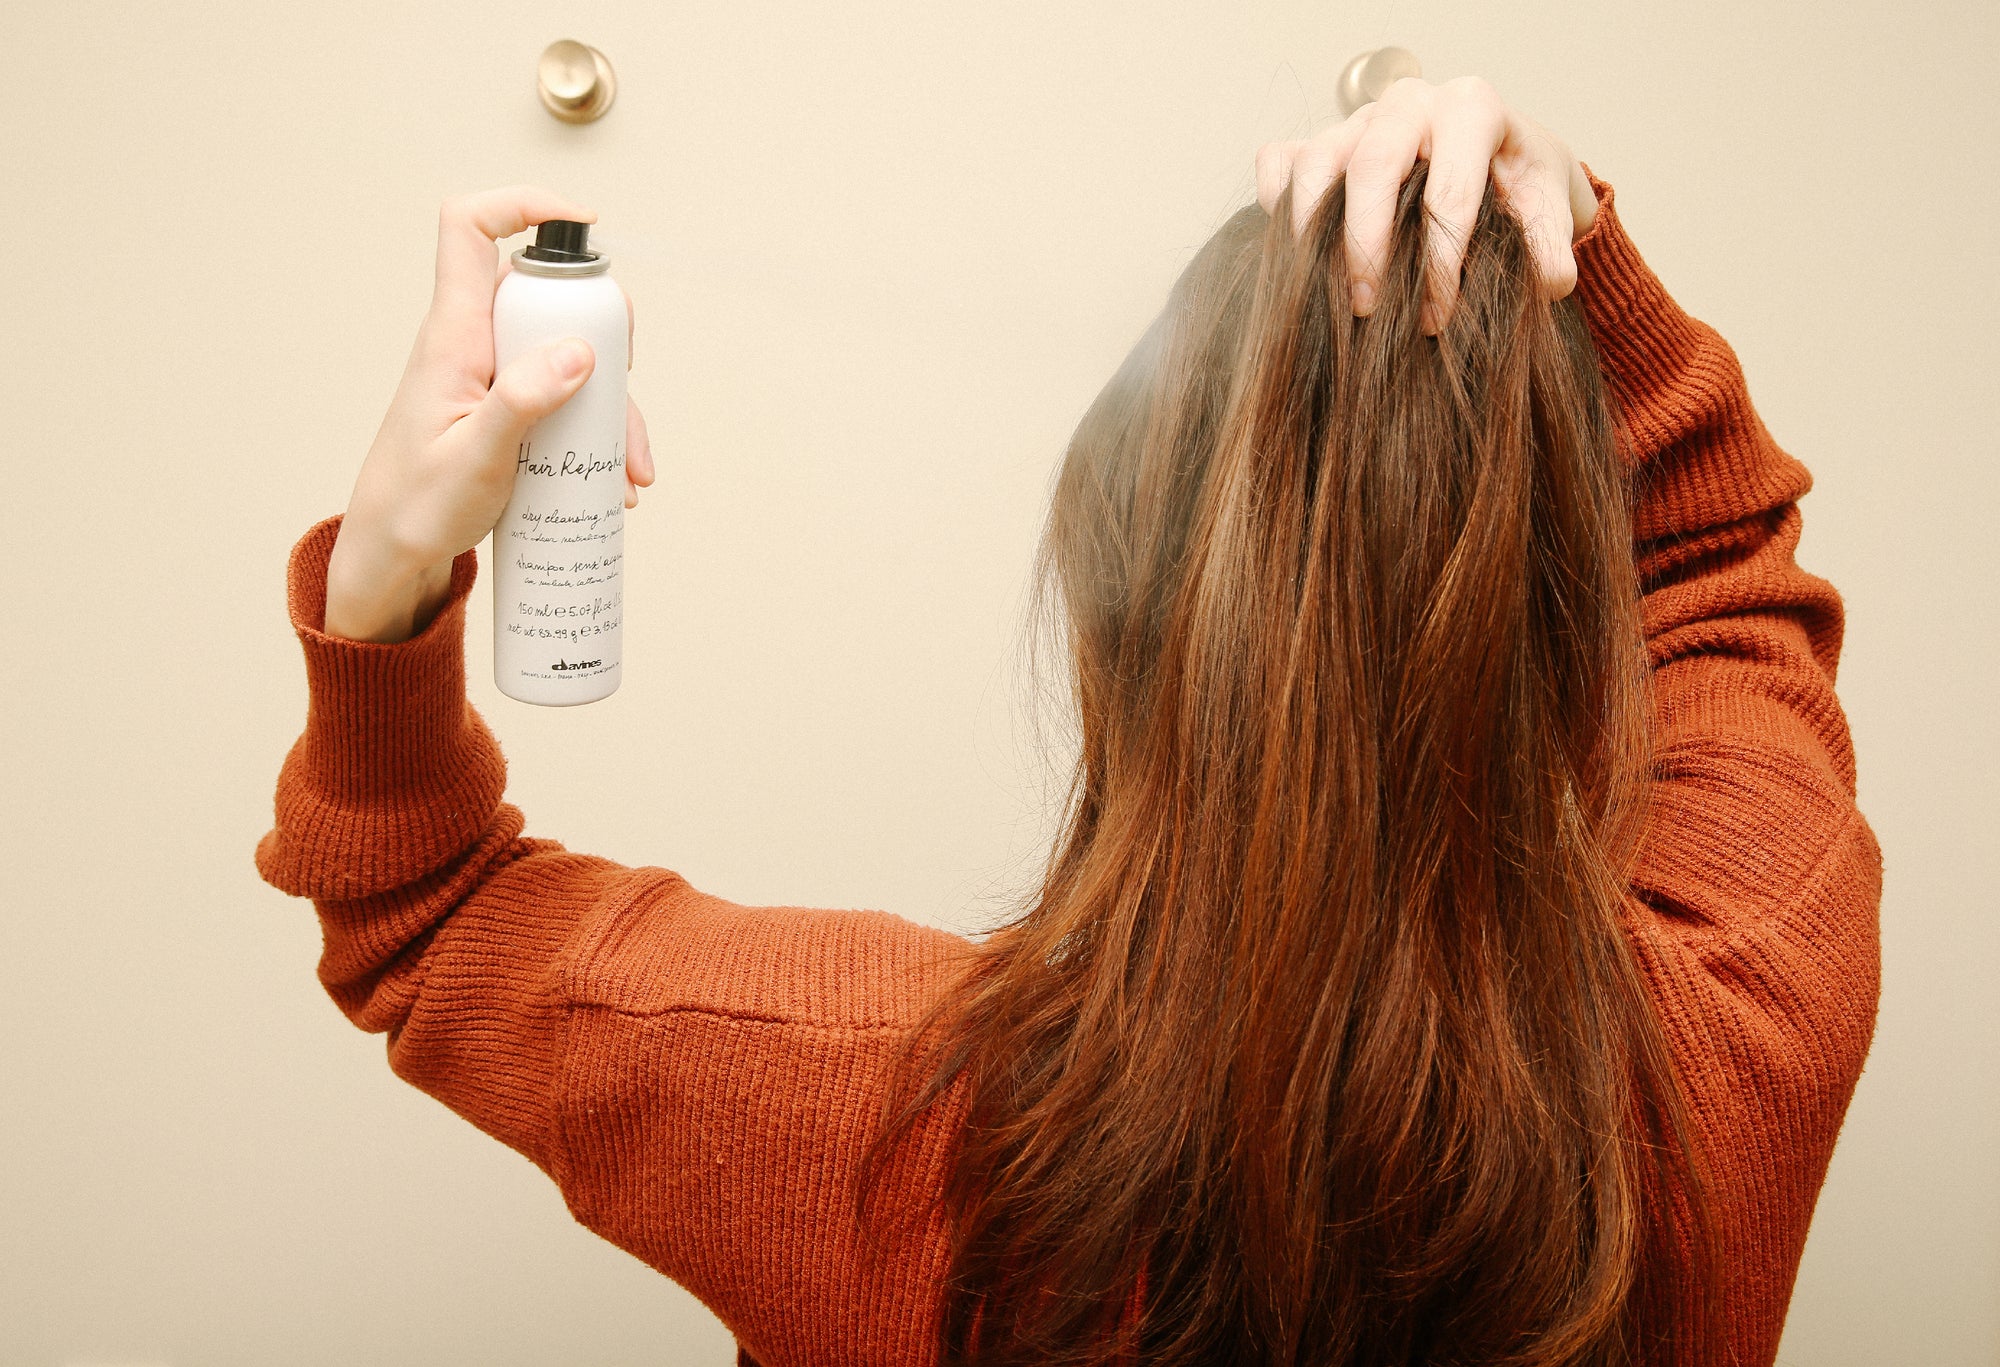 Is dry shampoo bad for your hair